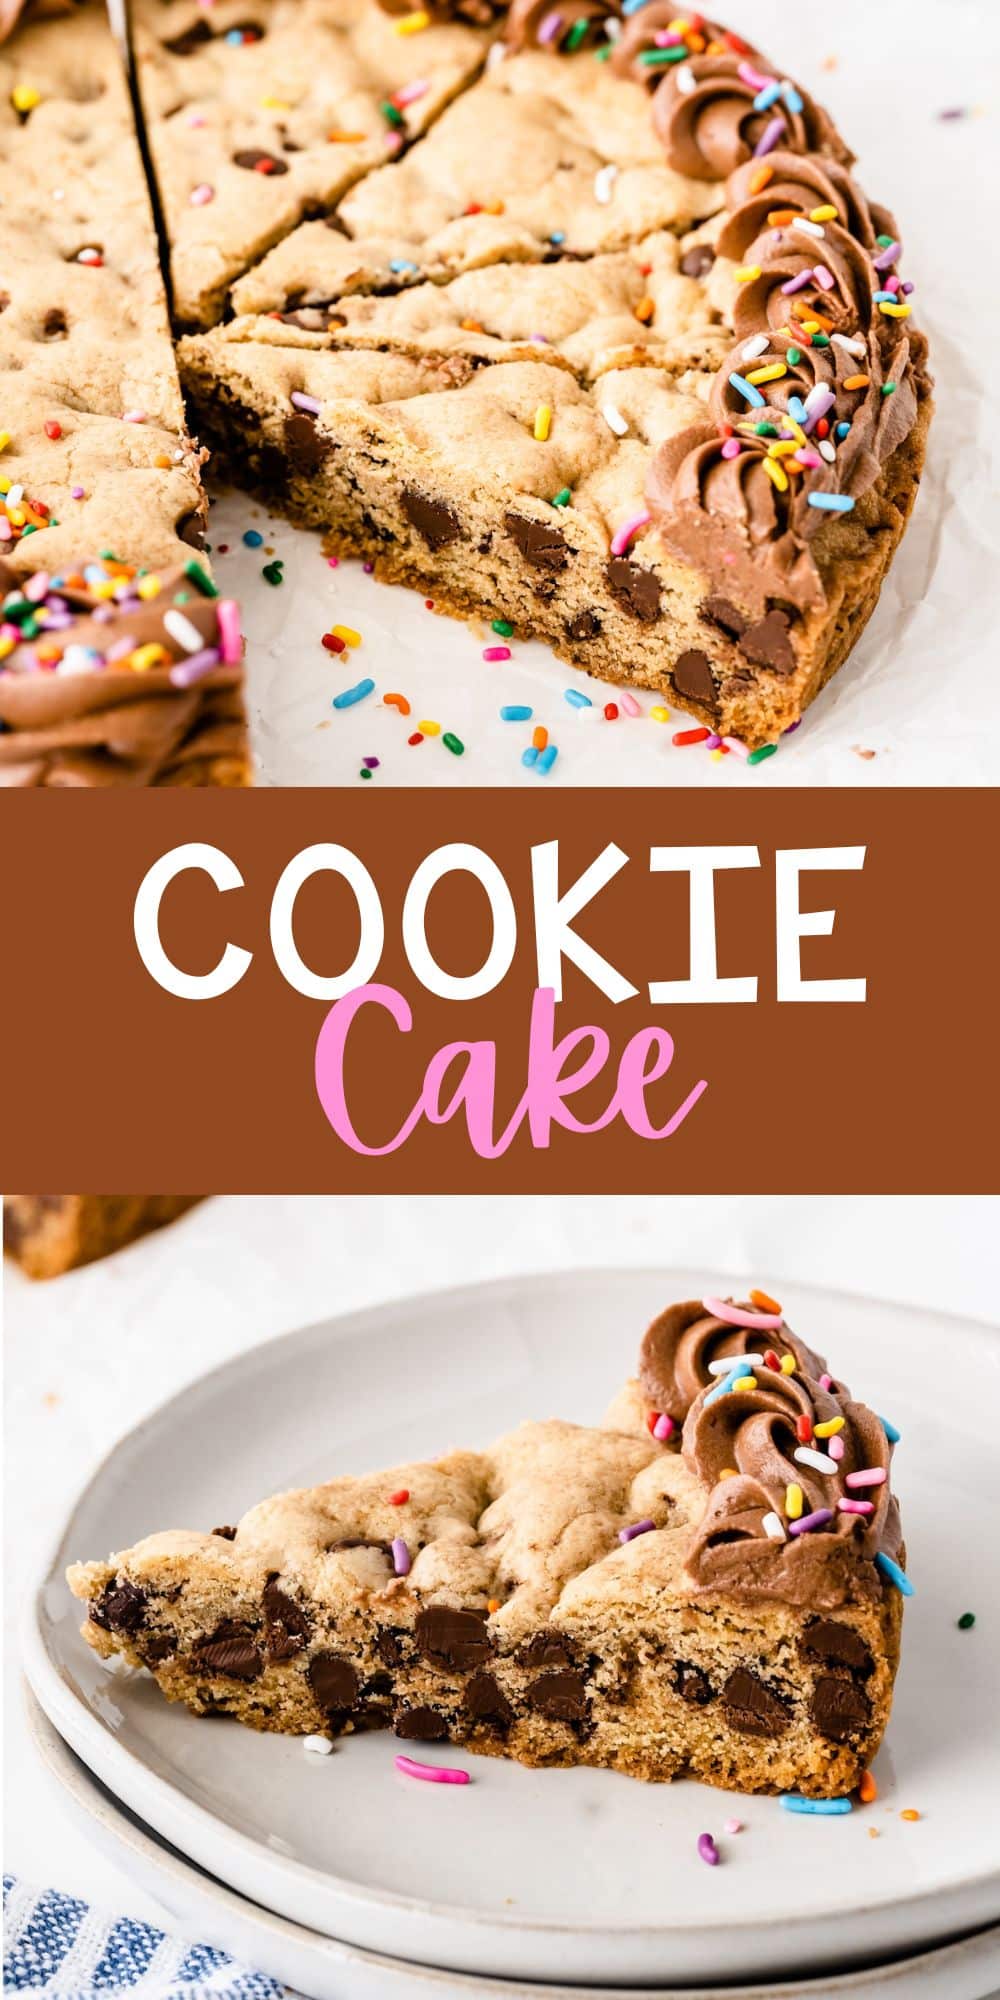 two photos of giant chocolate chip cookies with chocolate frosting and sprinkles on top with words on the image.